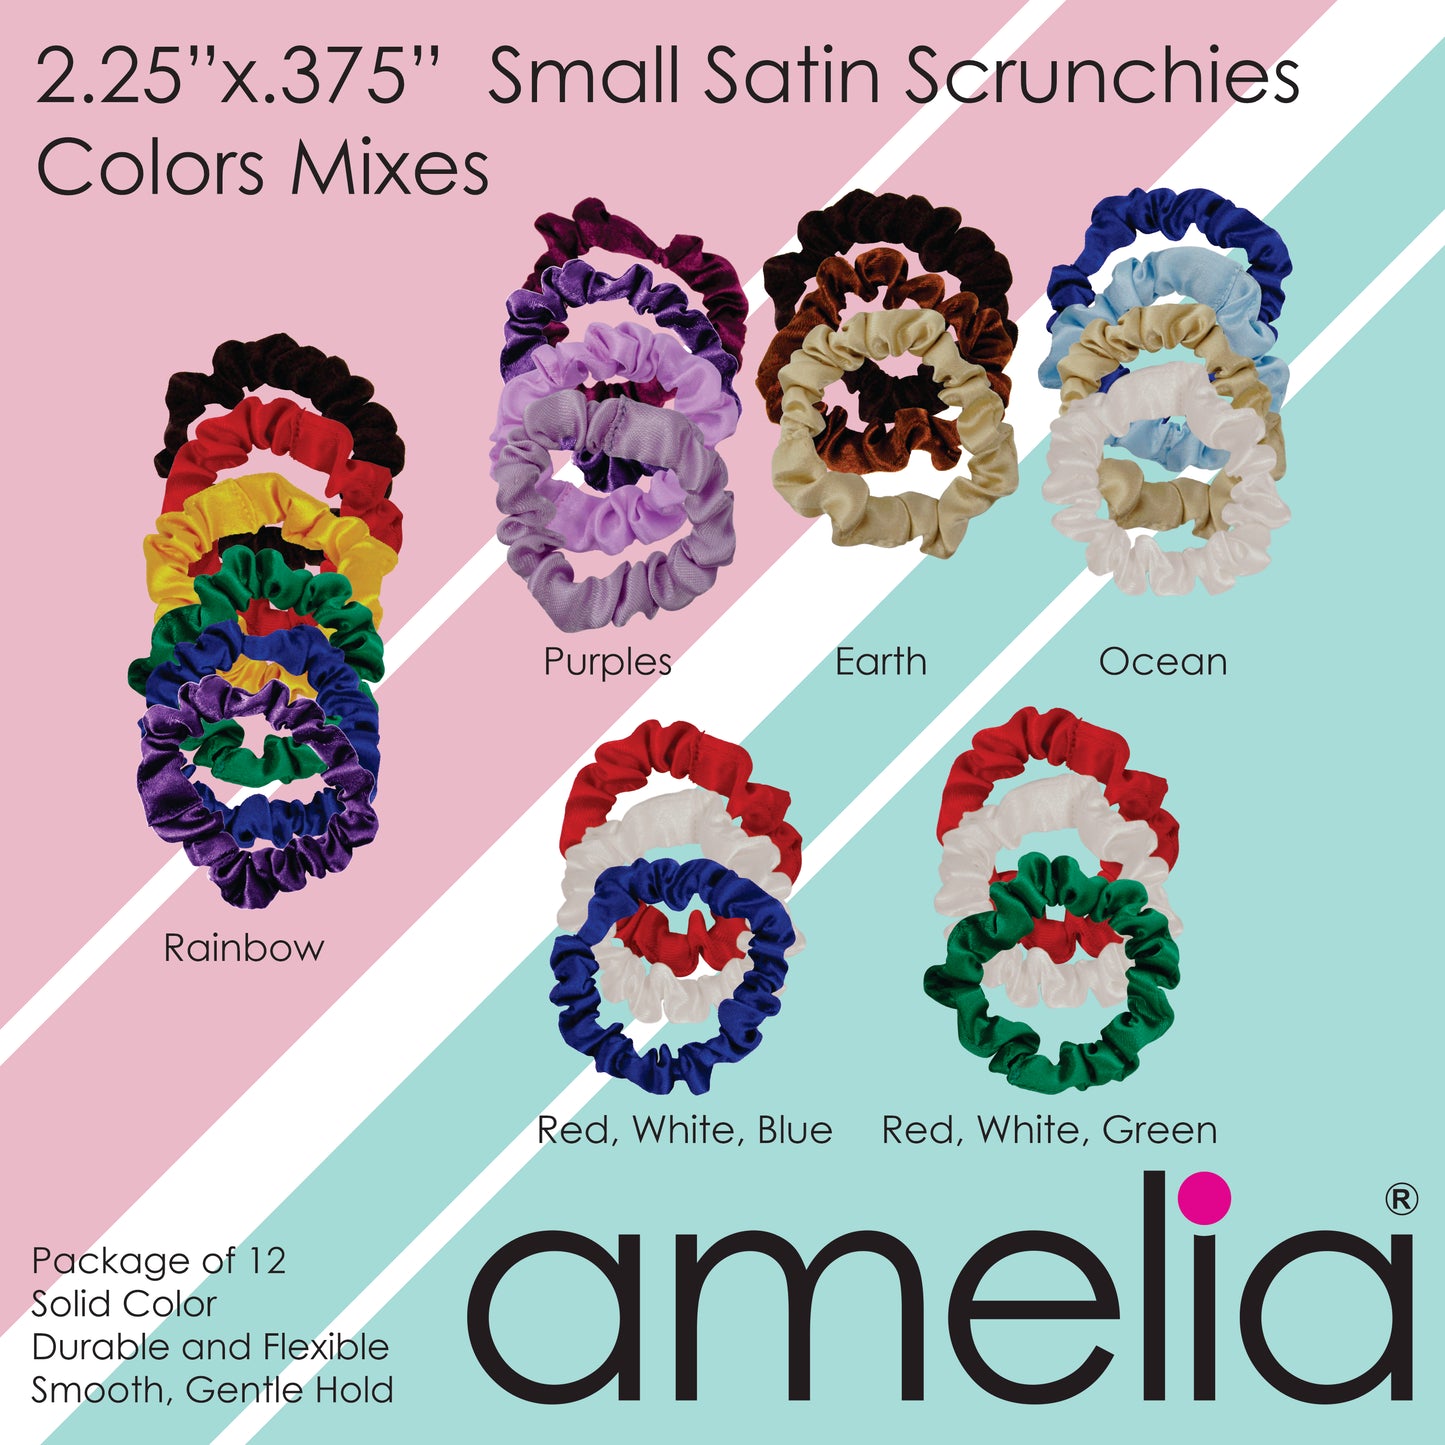 Amelia Beauty, Green Satin Scrunchies, 2.25in Diameter, Gentle on Hair, Strong Hold, No Snag, No Dents or Creases. 12 Pack